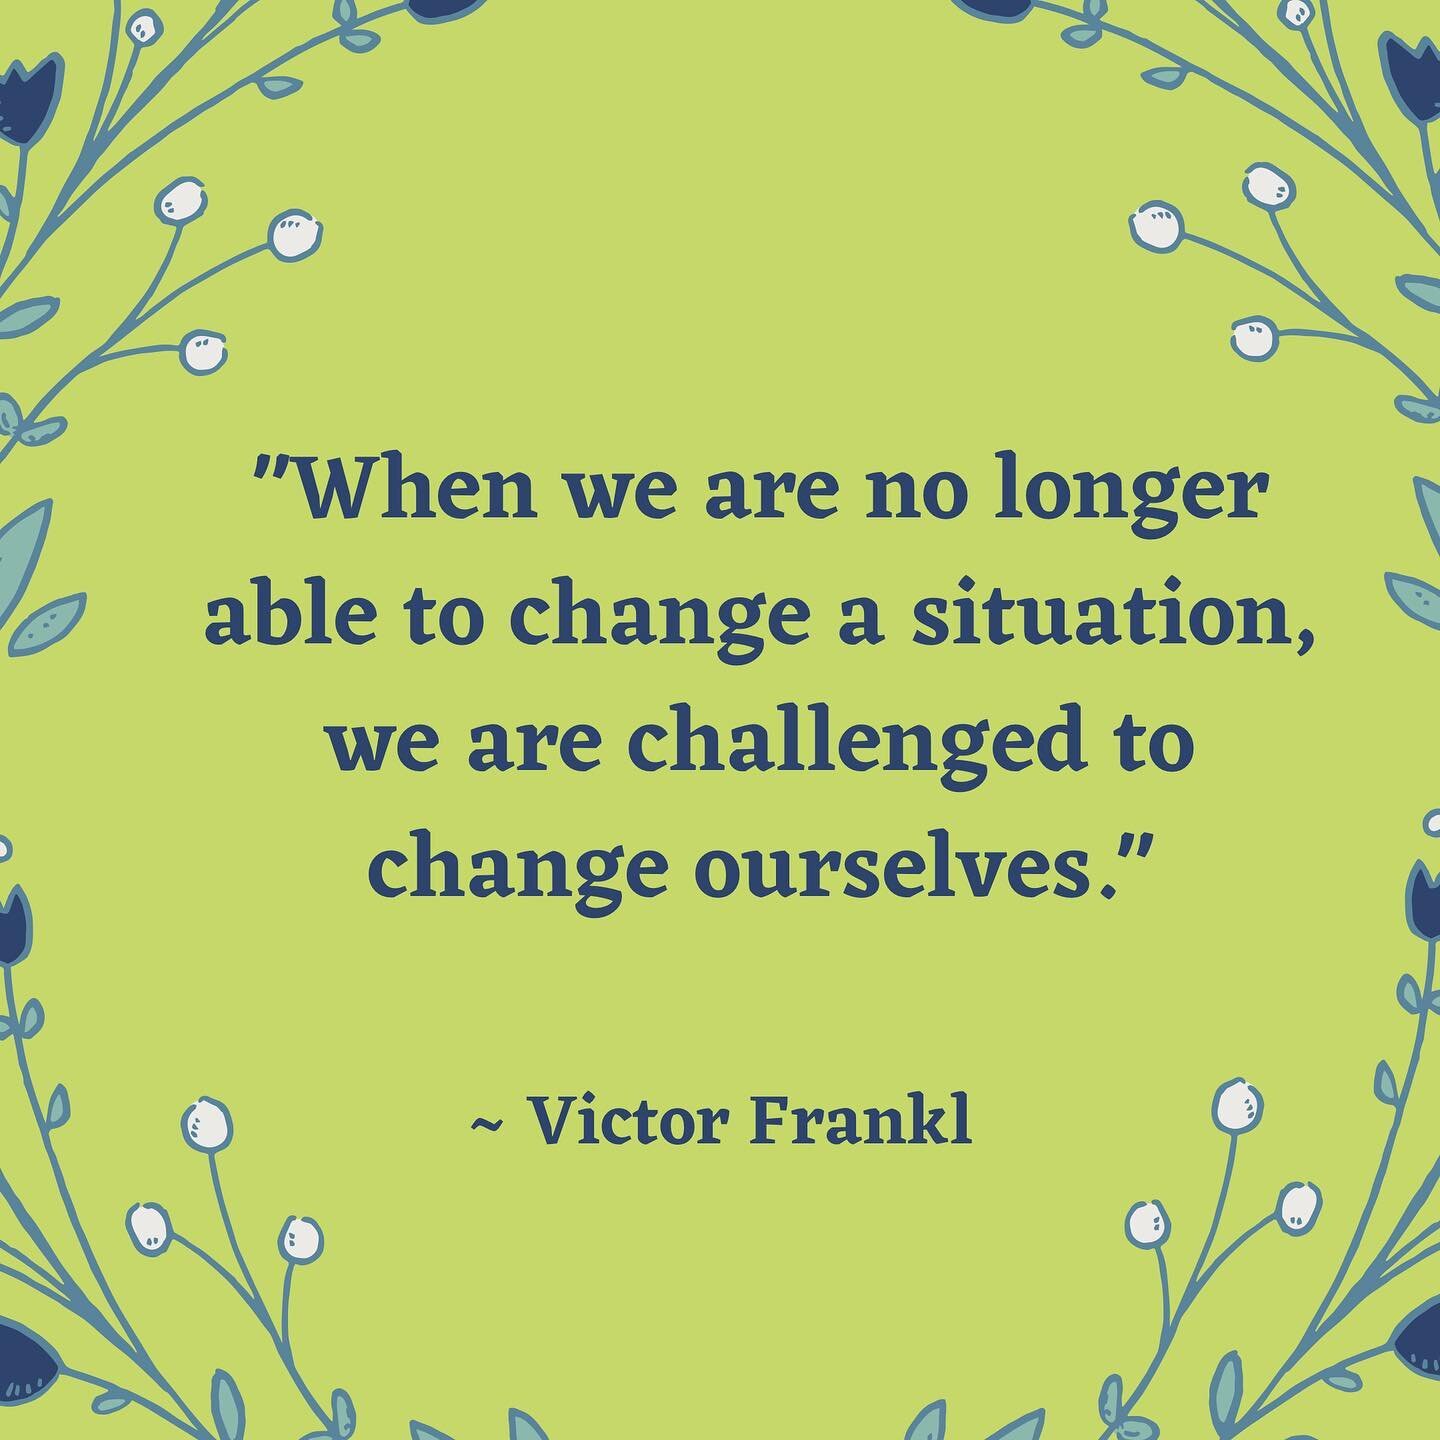 #victorfrankl #therapyworks #counseling #therapyiscool #selfgrowth #selfgrowthjourney #recoveryispossible #recoveryjourney #loveyourself